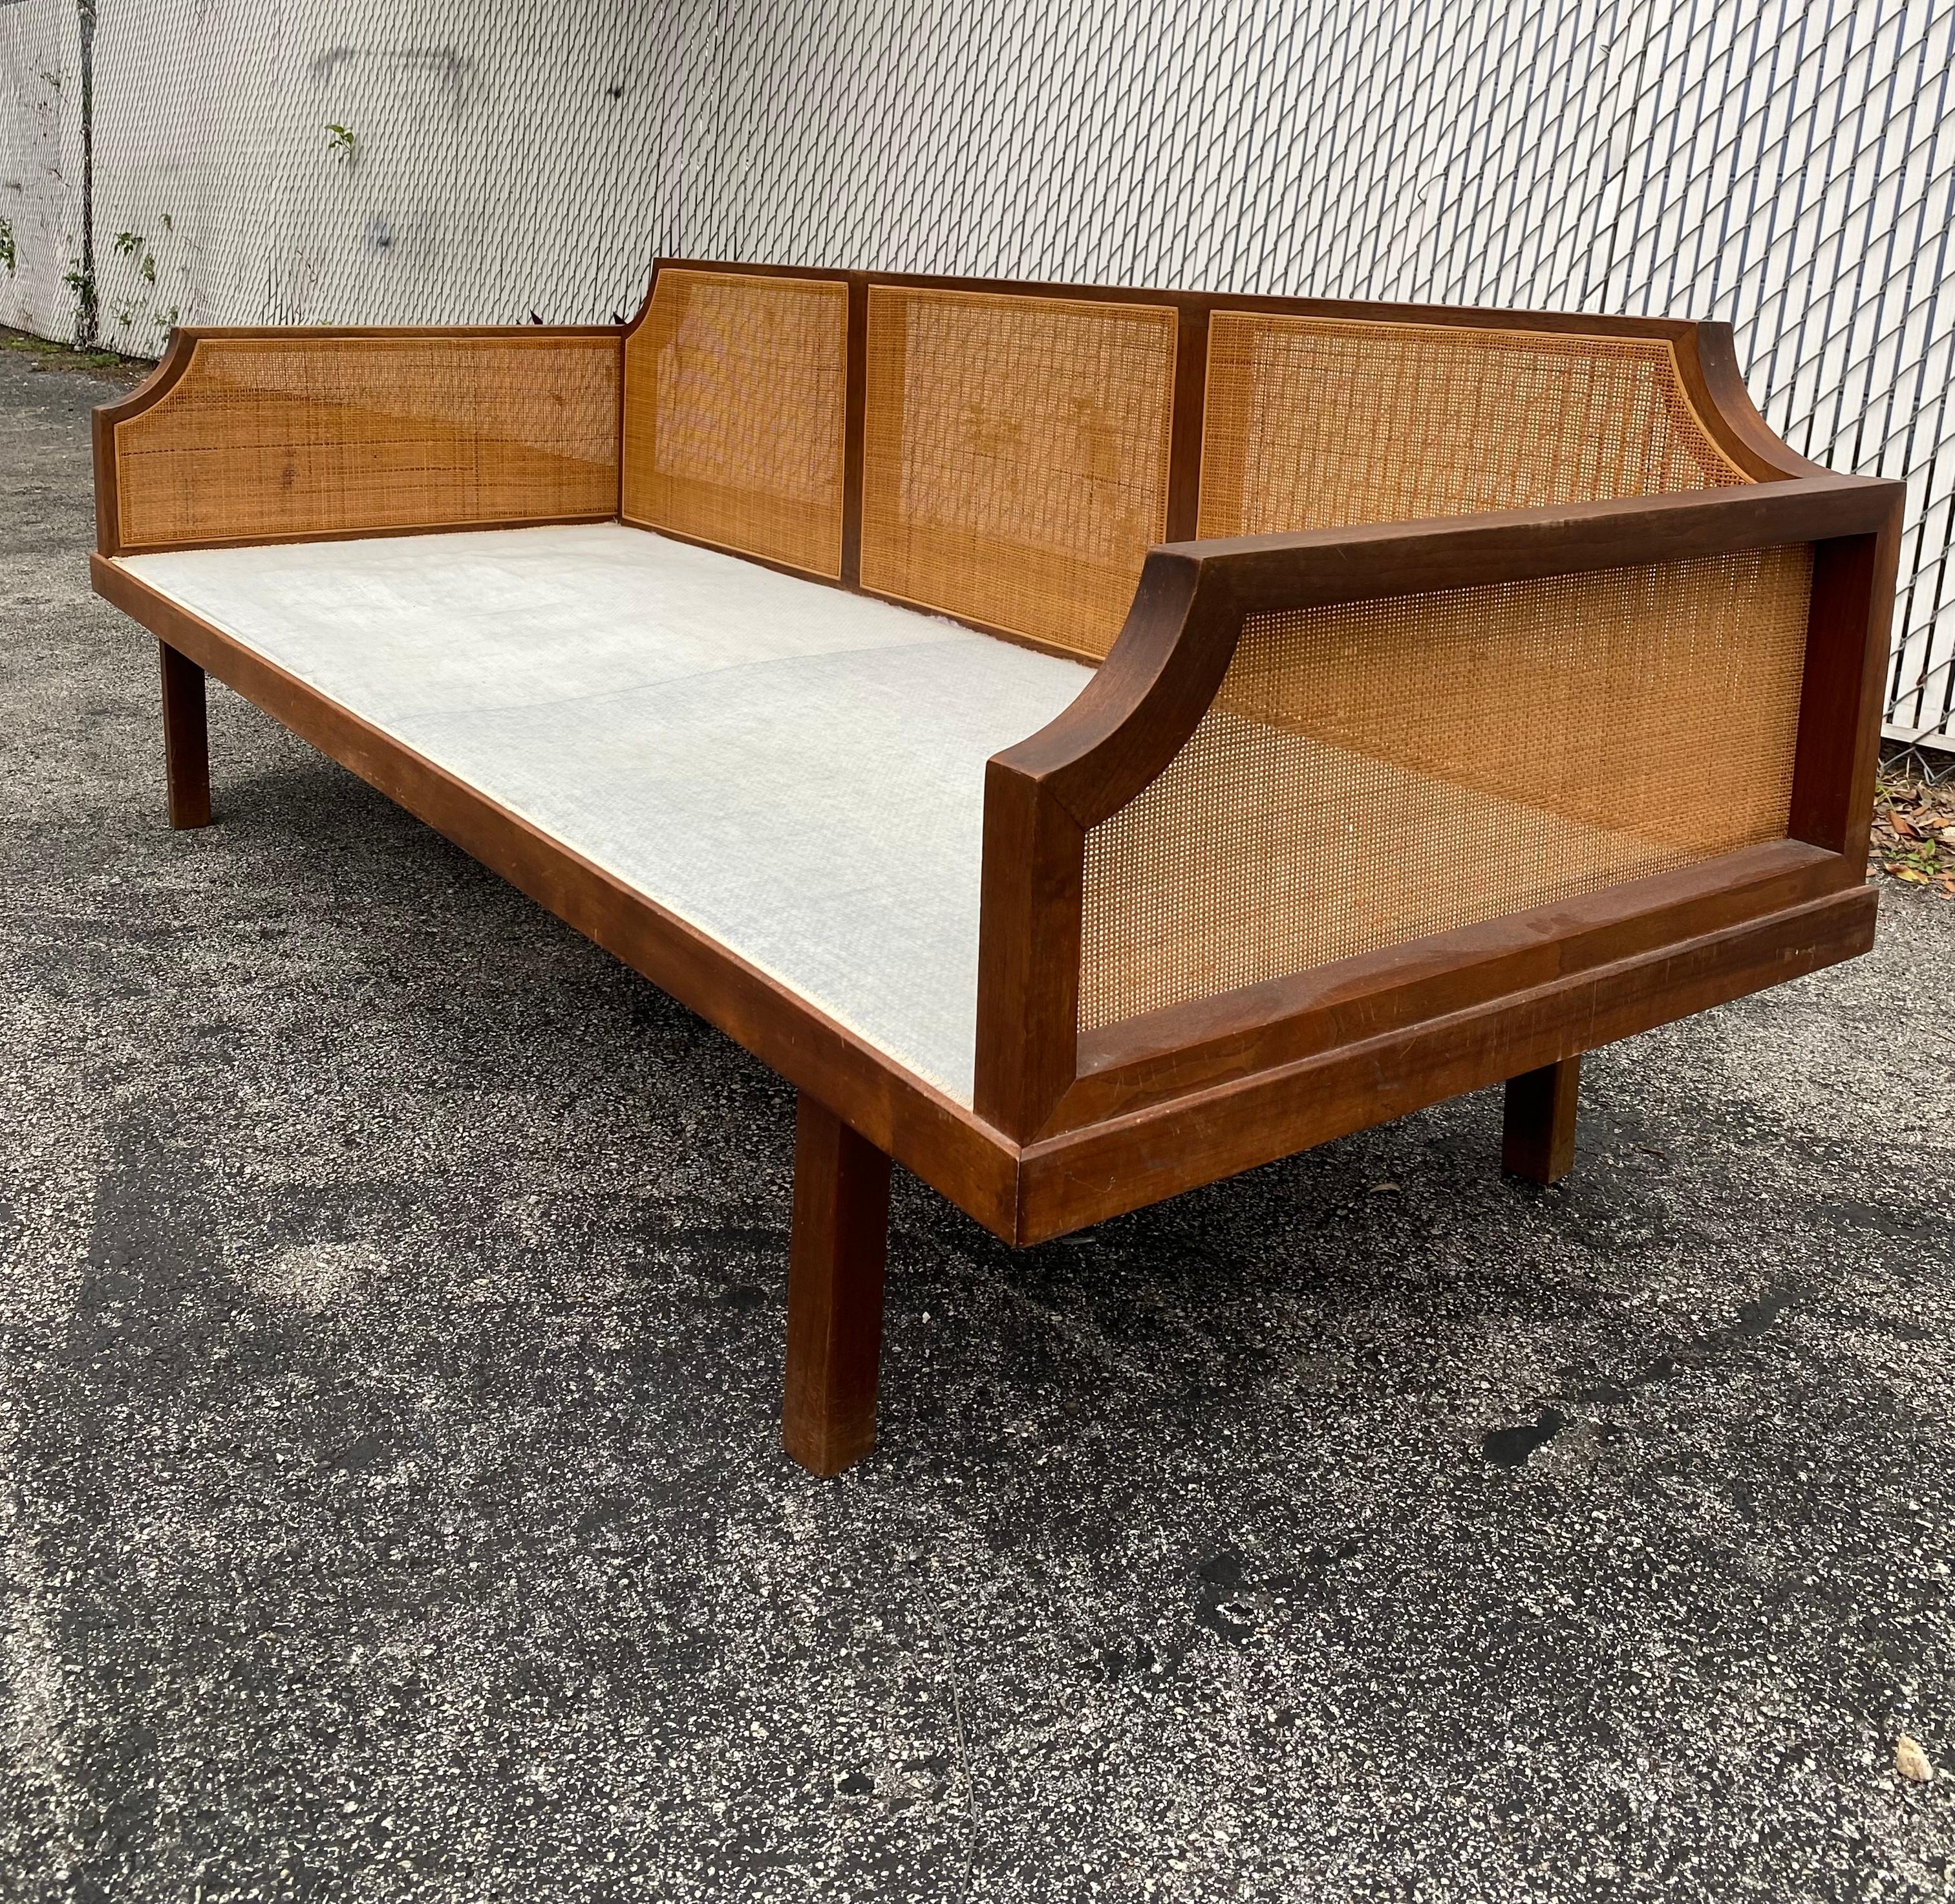 1960s Mid-Century Teak Cane Sofa or Daybed 3